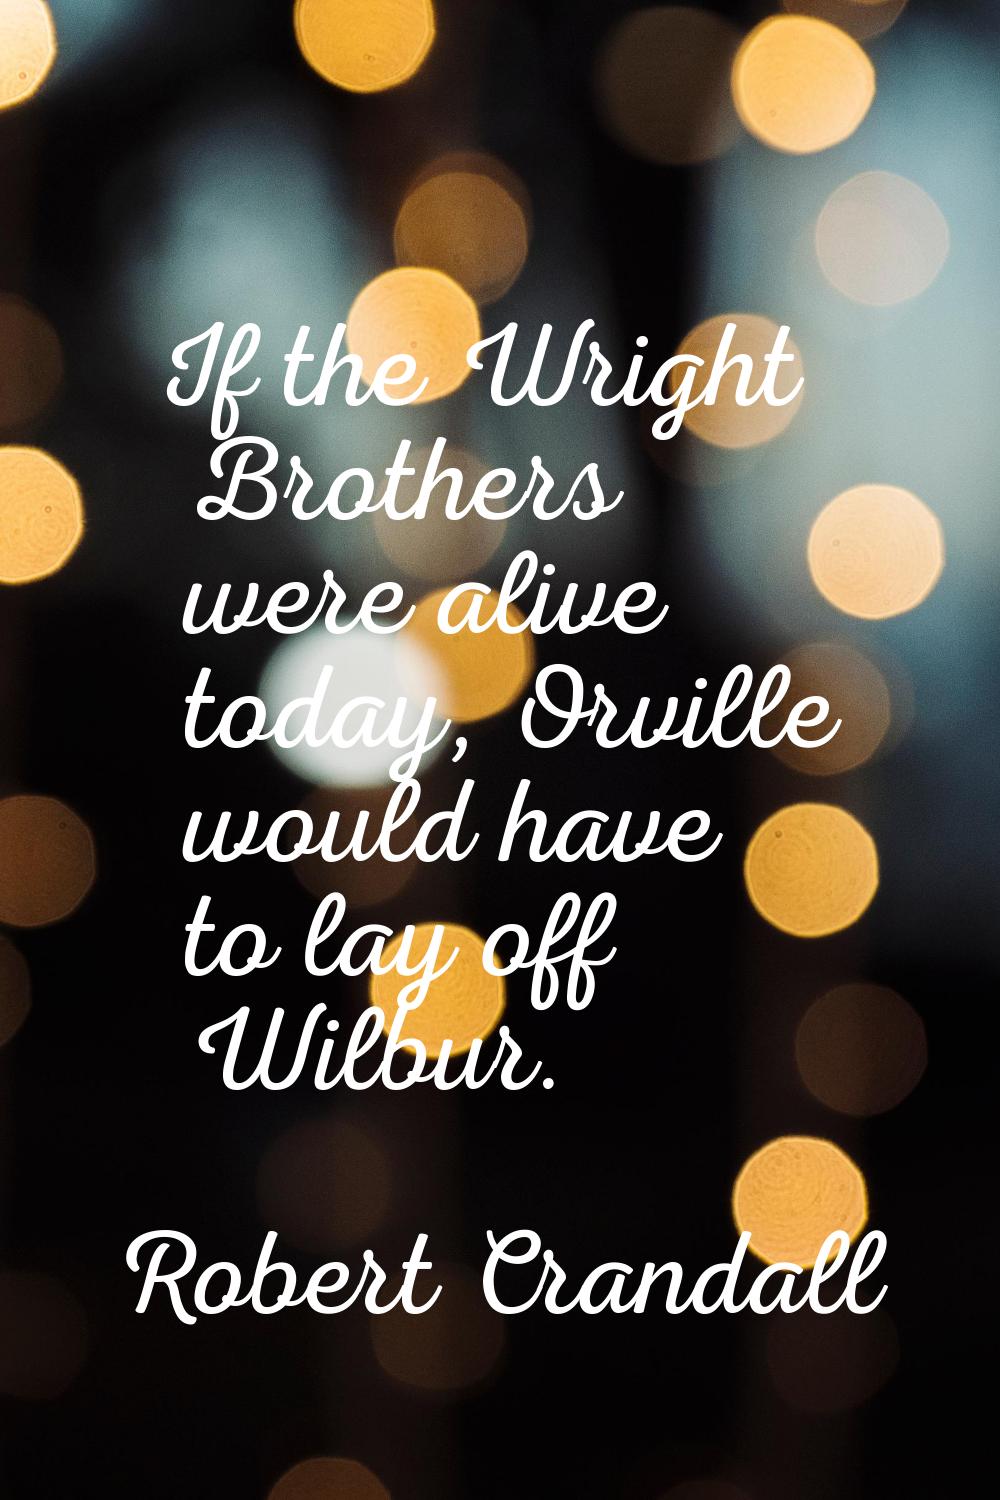 If the Wright Brothers were alive today, Orville would have to lay off Wilbur.